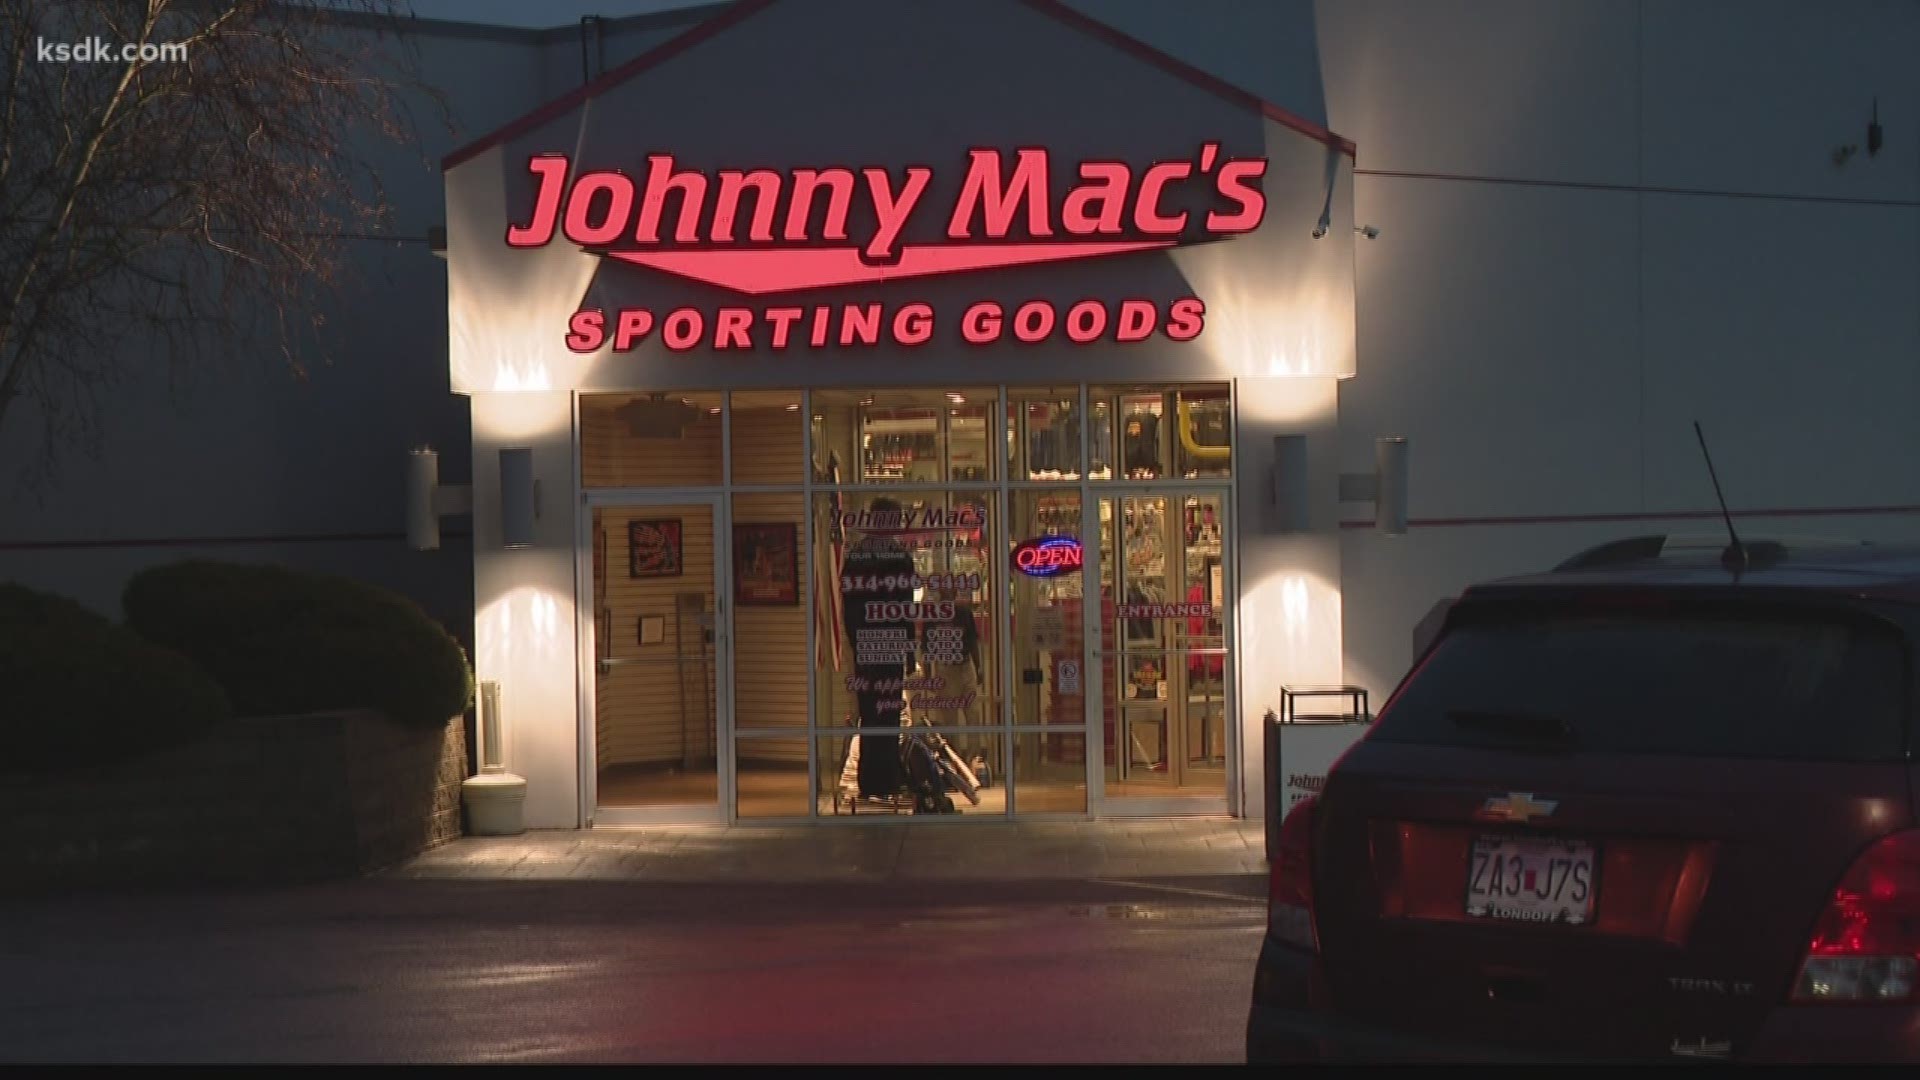 End of an Era: Johnny Mac's to close all locations after 51 years in business | ksdk.com